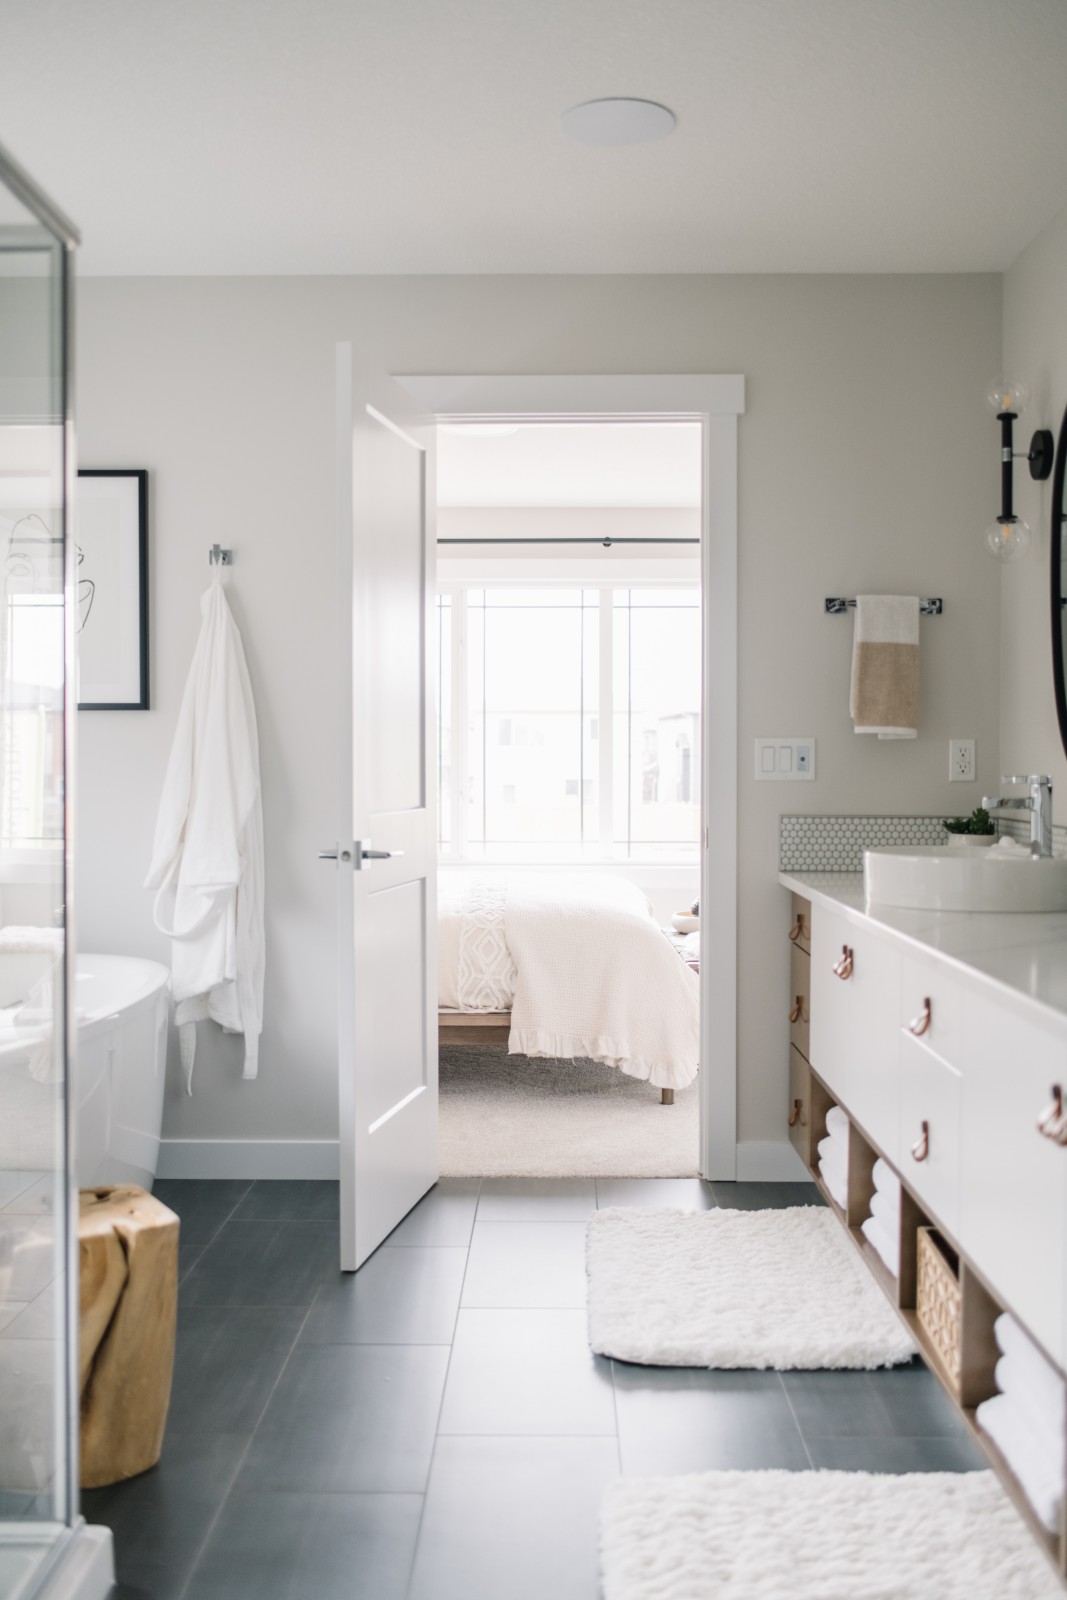 A view of the ensuite looking in to the master bedroom of the Nysa showhome in Cy Becker. The dark floor tile is brightened by all white wall, a long white and warm wood dual vanity with white countertops and round vessel sinks, and the white freestanding tub in front of the window